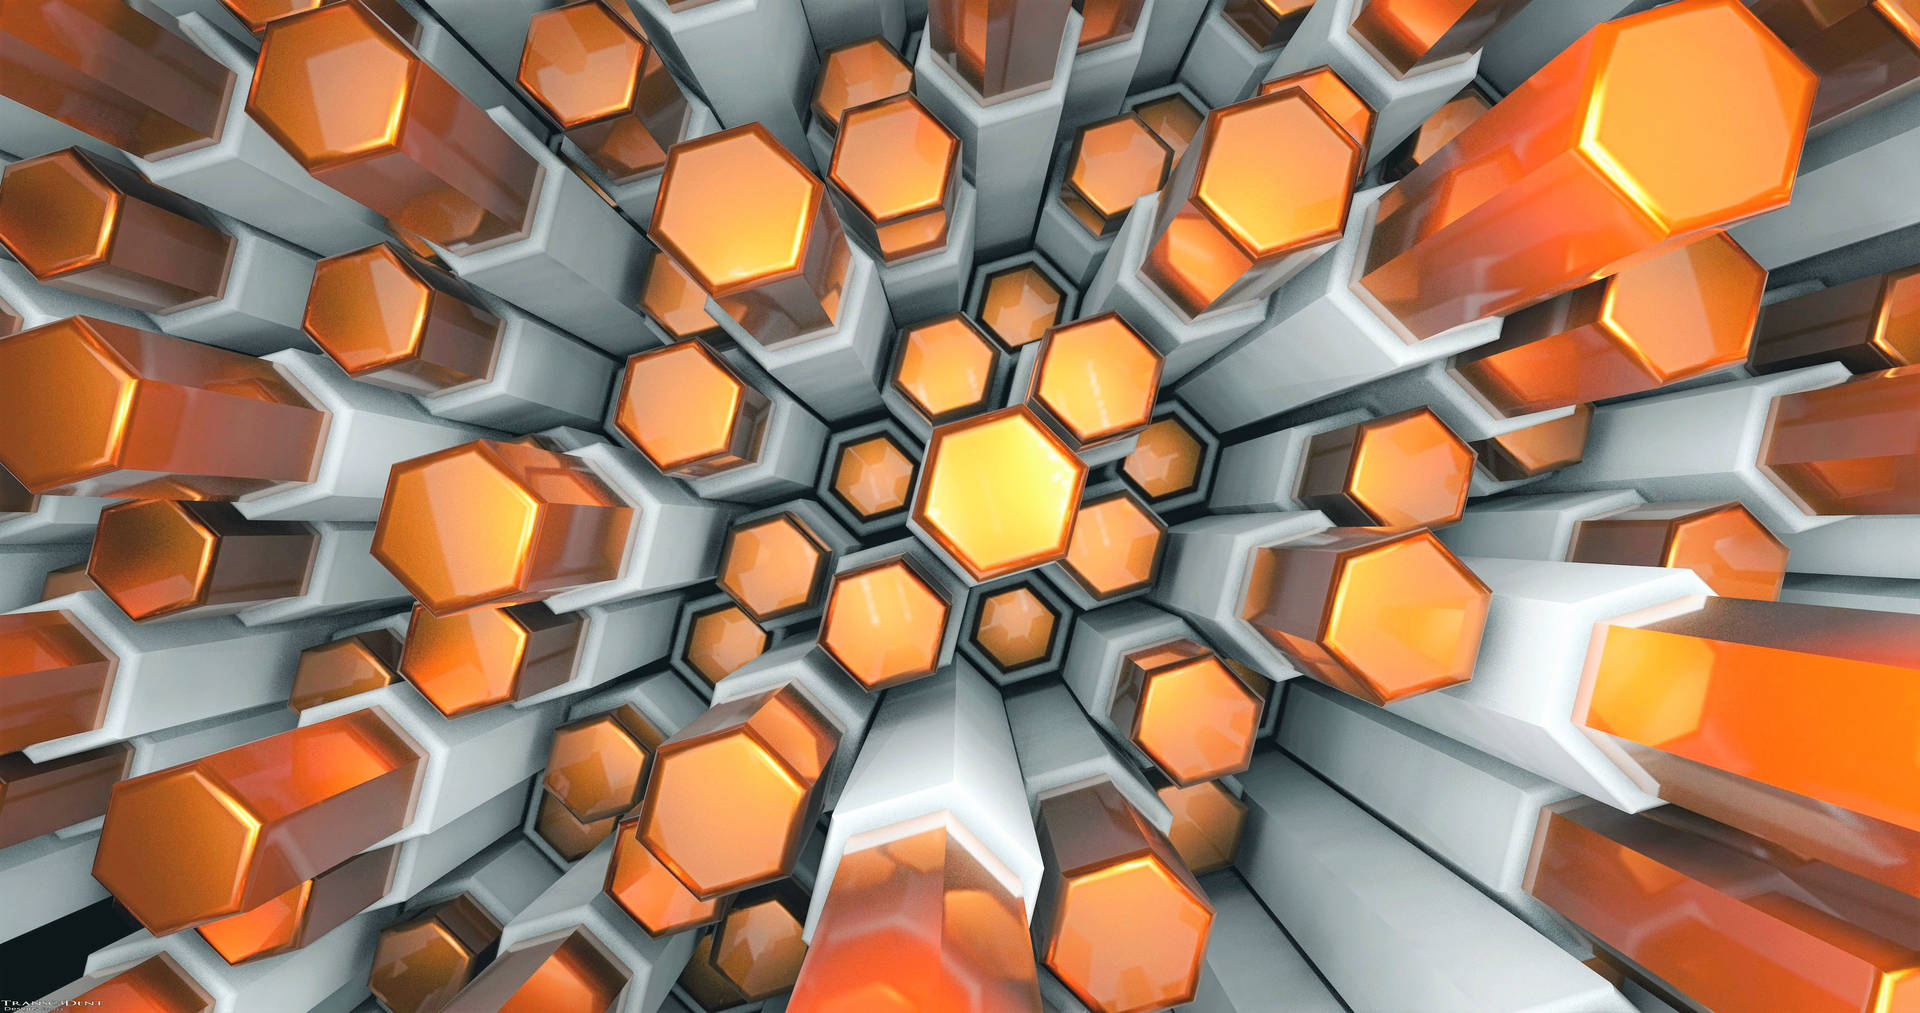 Hexagon 4096X2160 Wallpaper and Background Image